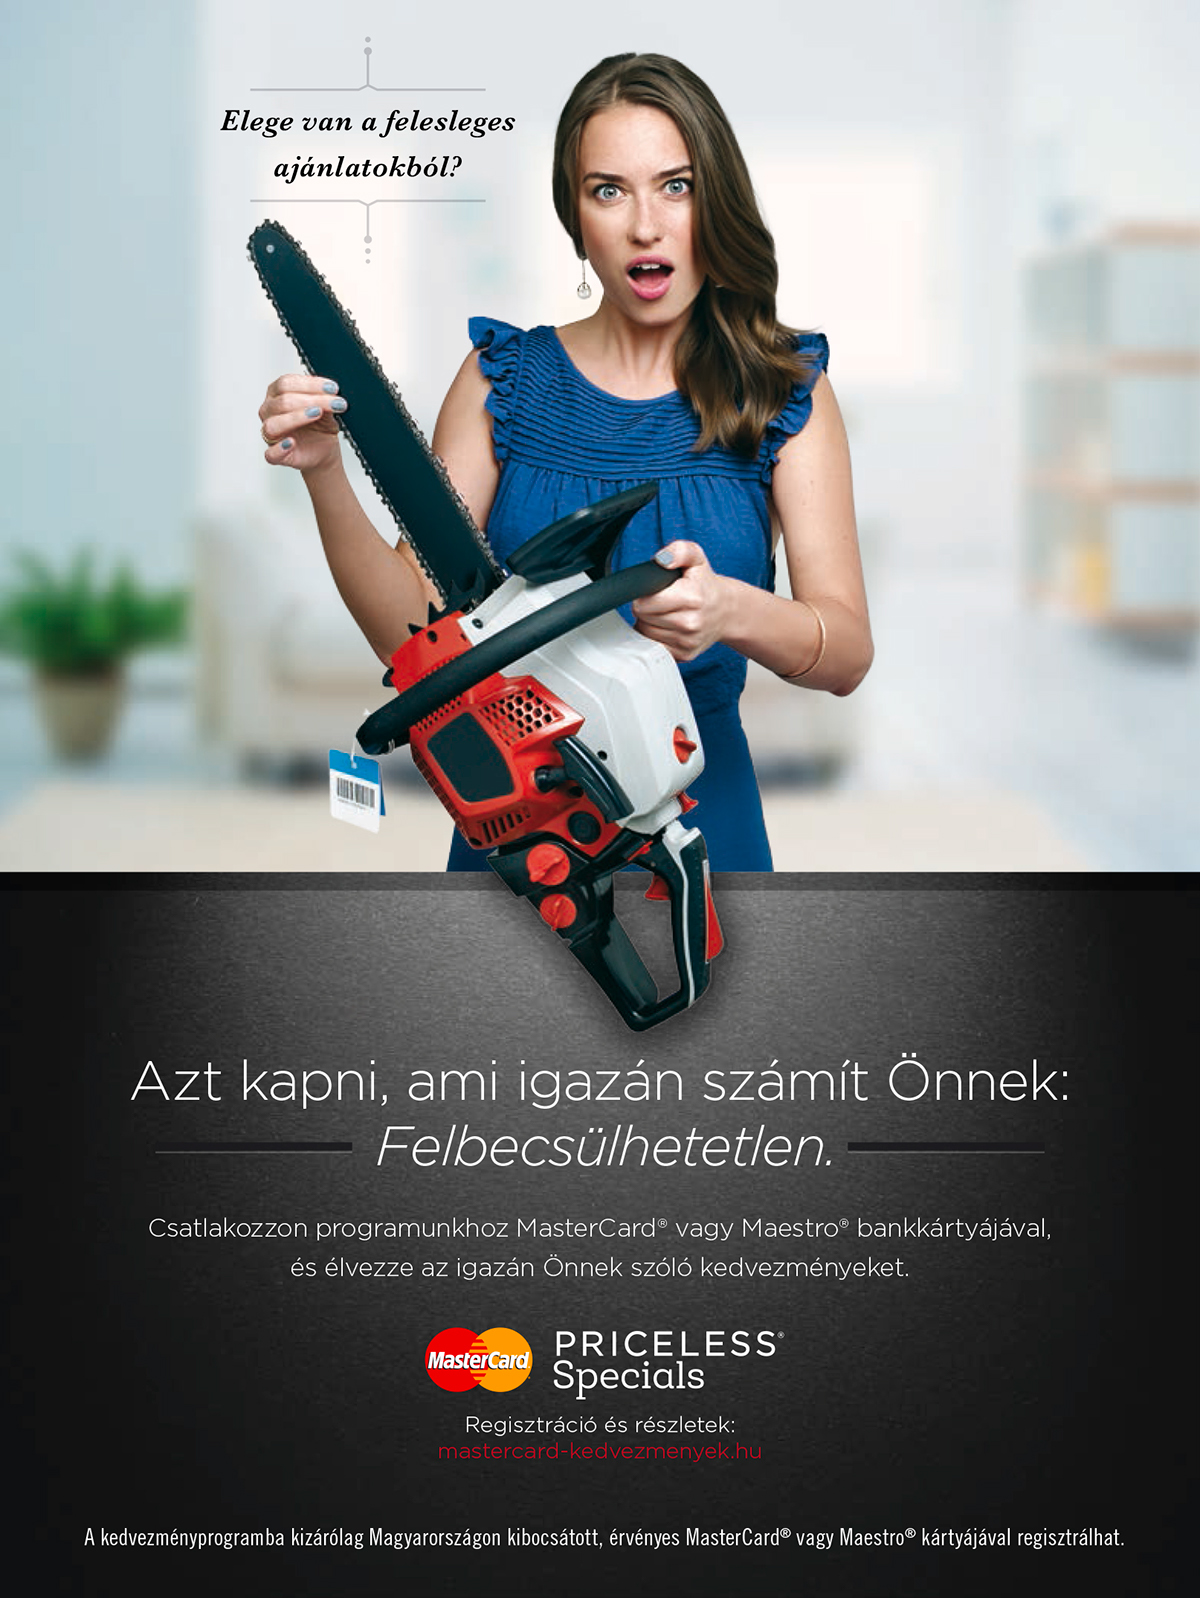 mastercard print ad priceless Specials what? OOH